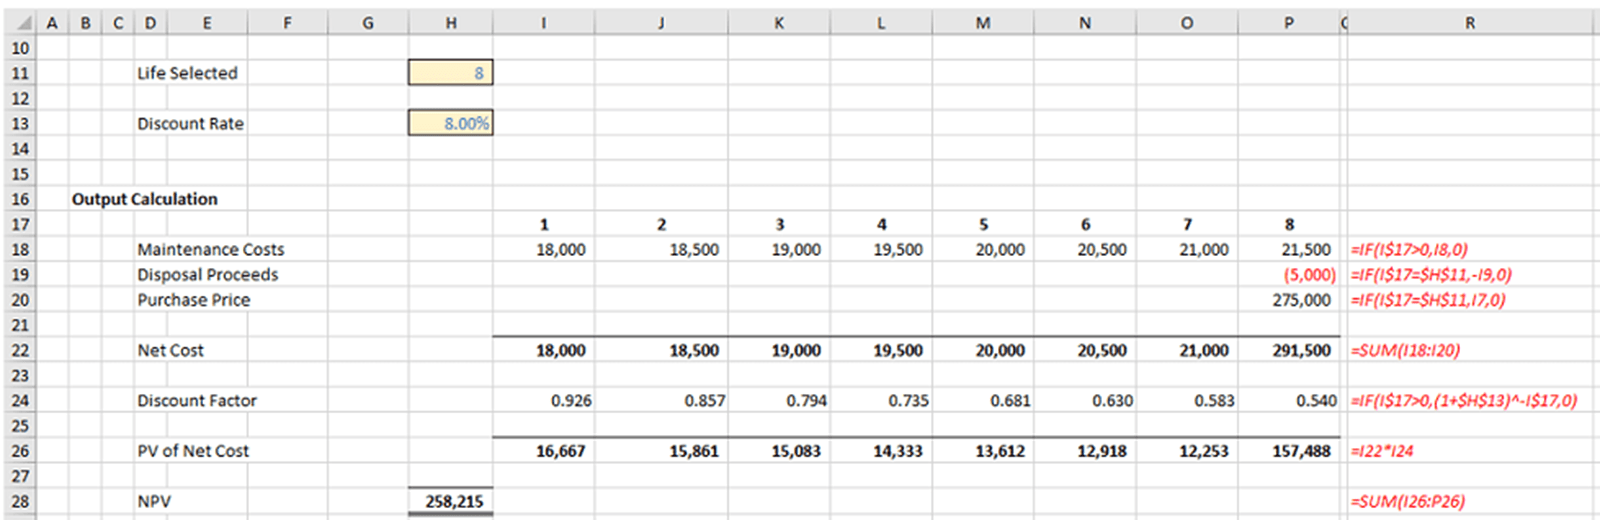 image of discounted cash flow financial appraisal 